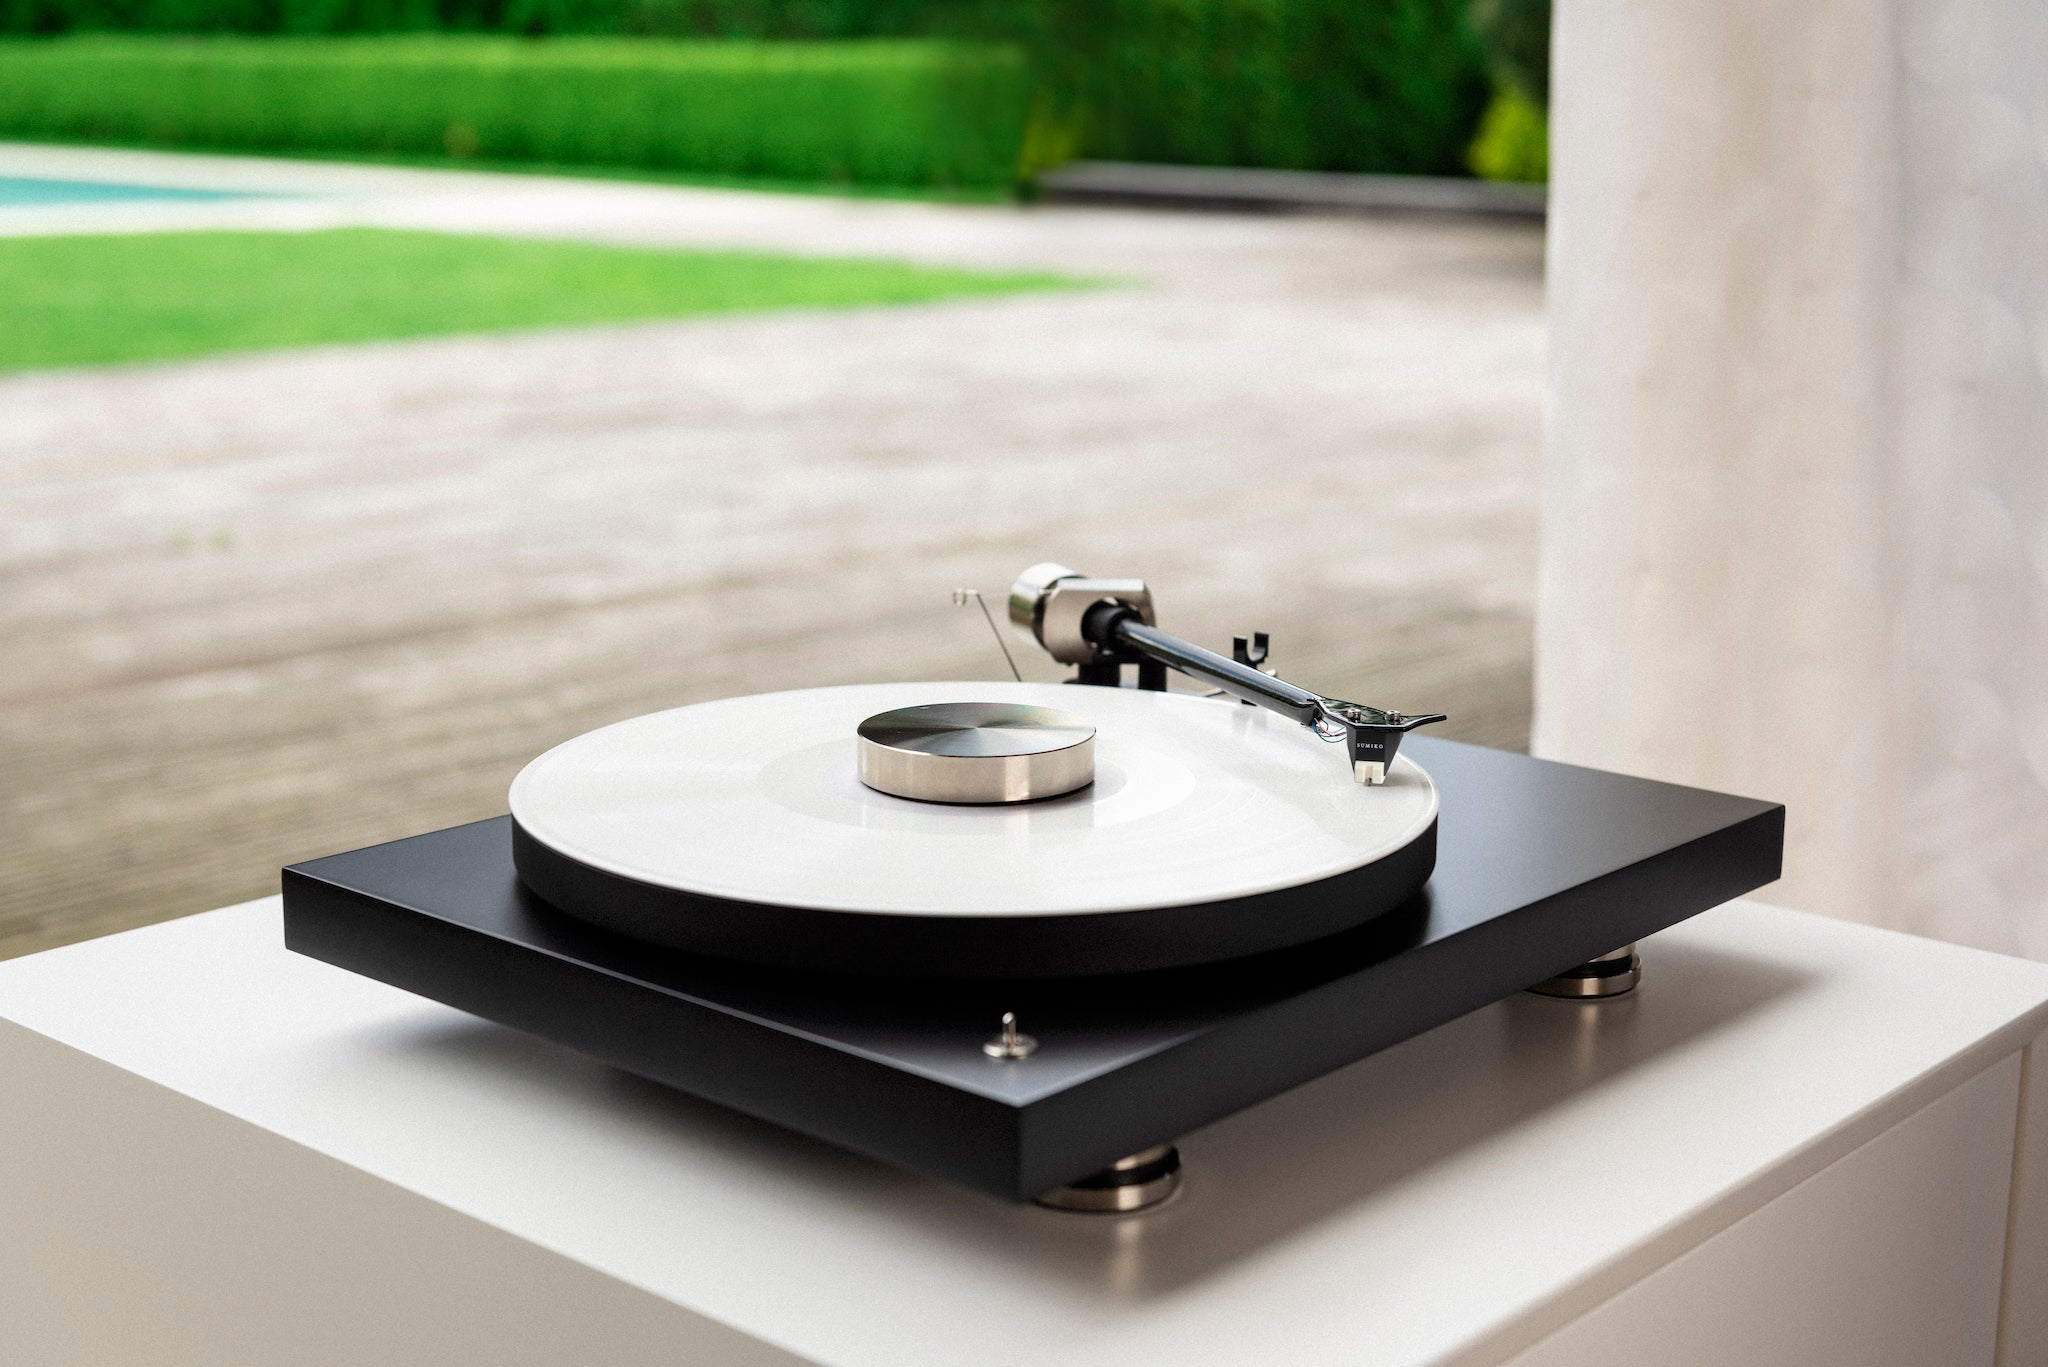 Pro-Ject Debut PRO 3 quarter on white cabinet overlooking manicured garden